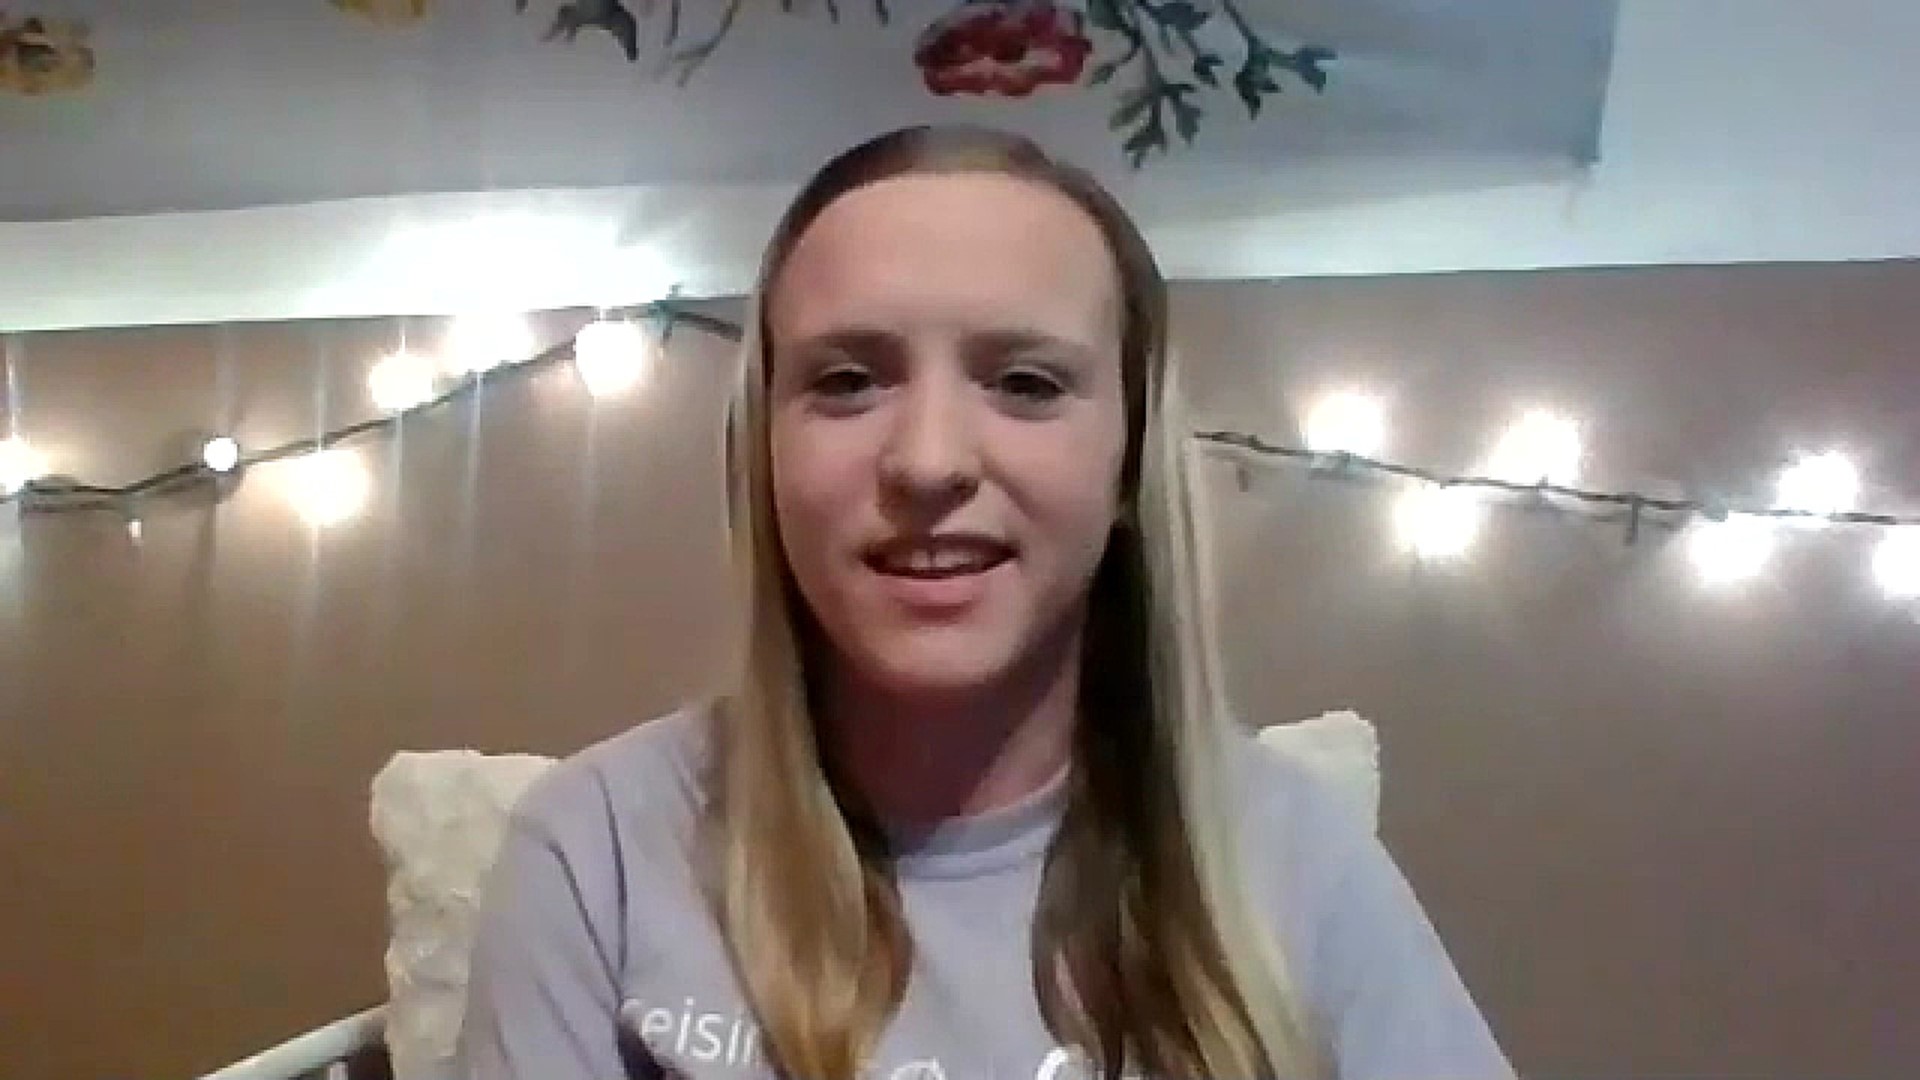 A young woman from Wayne County with cystic fibrosis shares her message about masking and keeping folks safe.